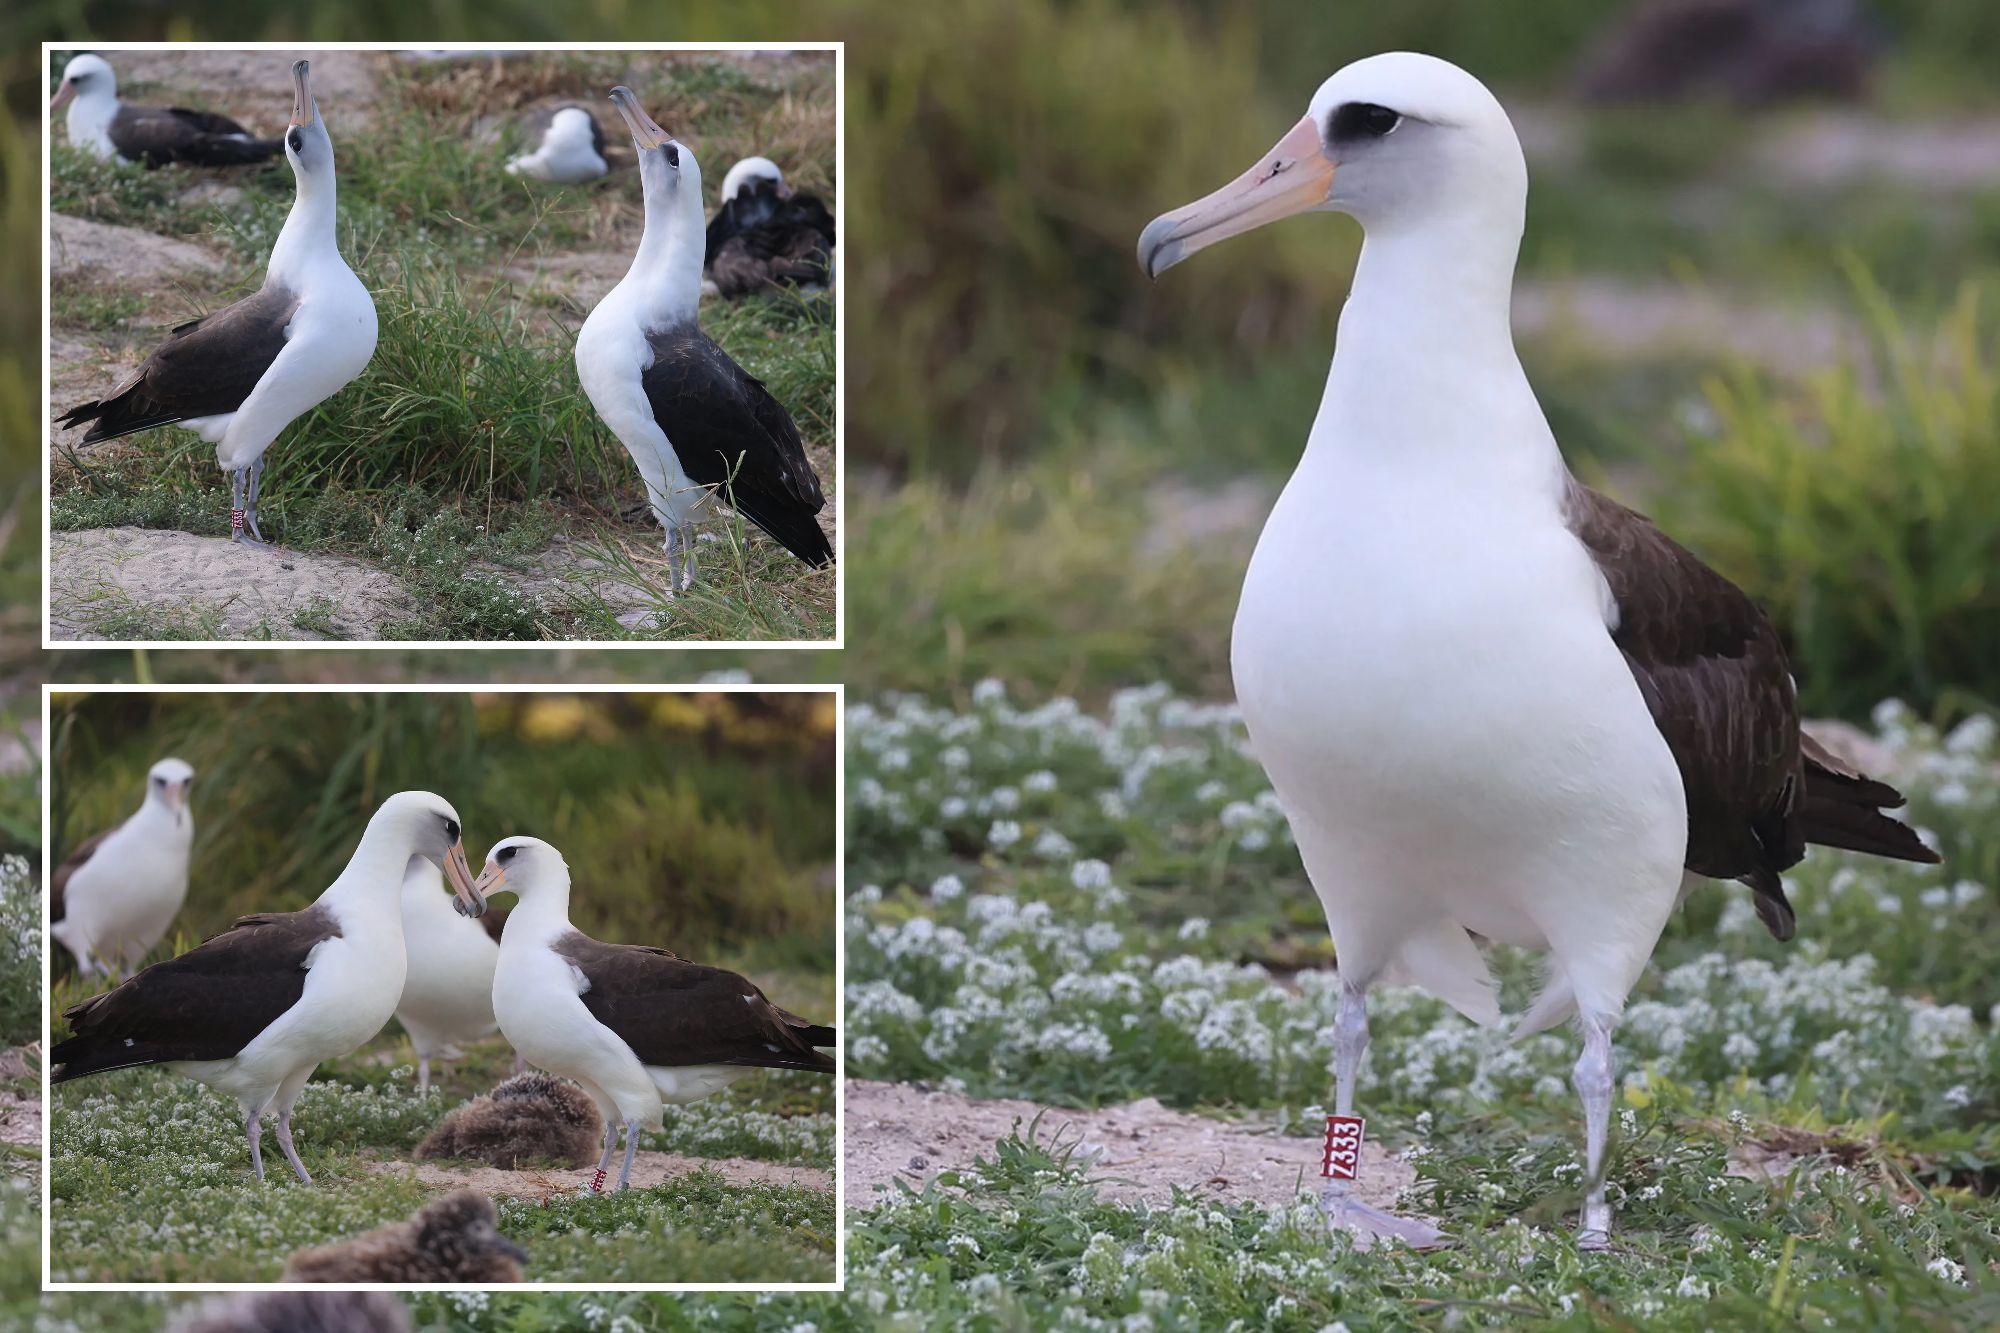 World’s oldest known wild bird, Wisdom, 72, is spotted courting new mates: ‘Quite spry for a septuagenarian’